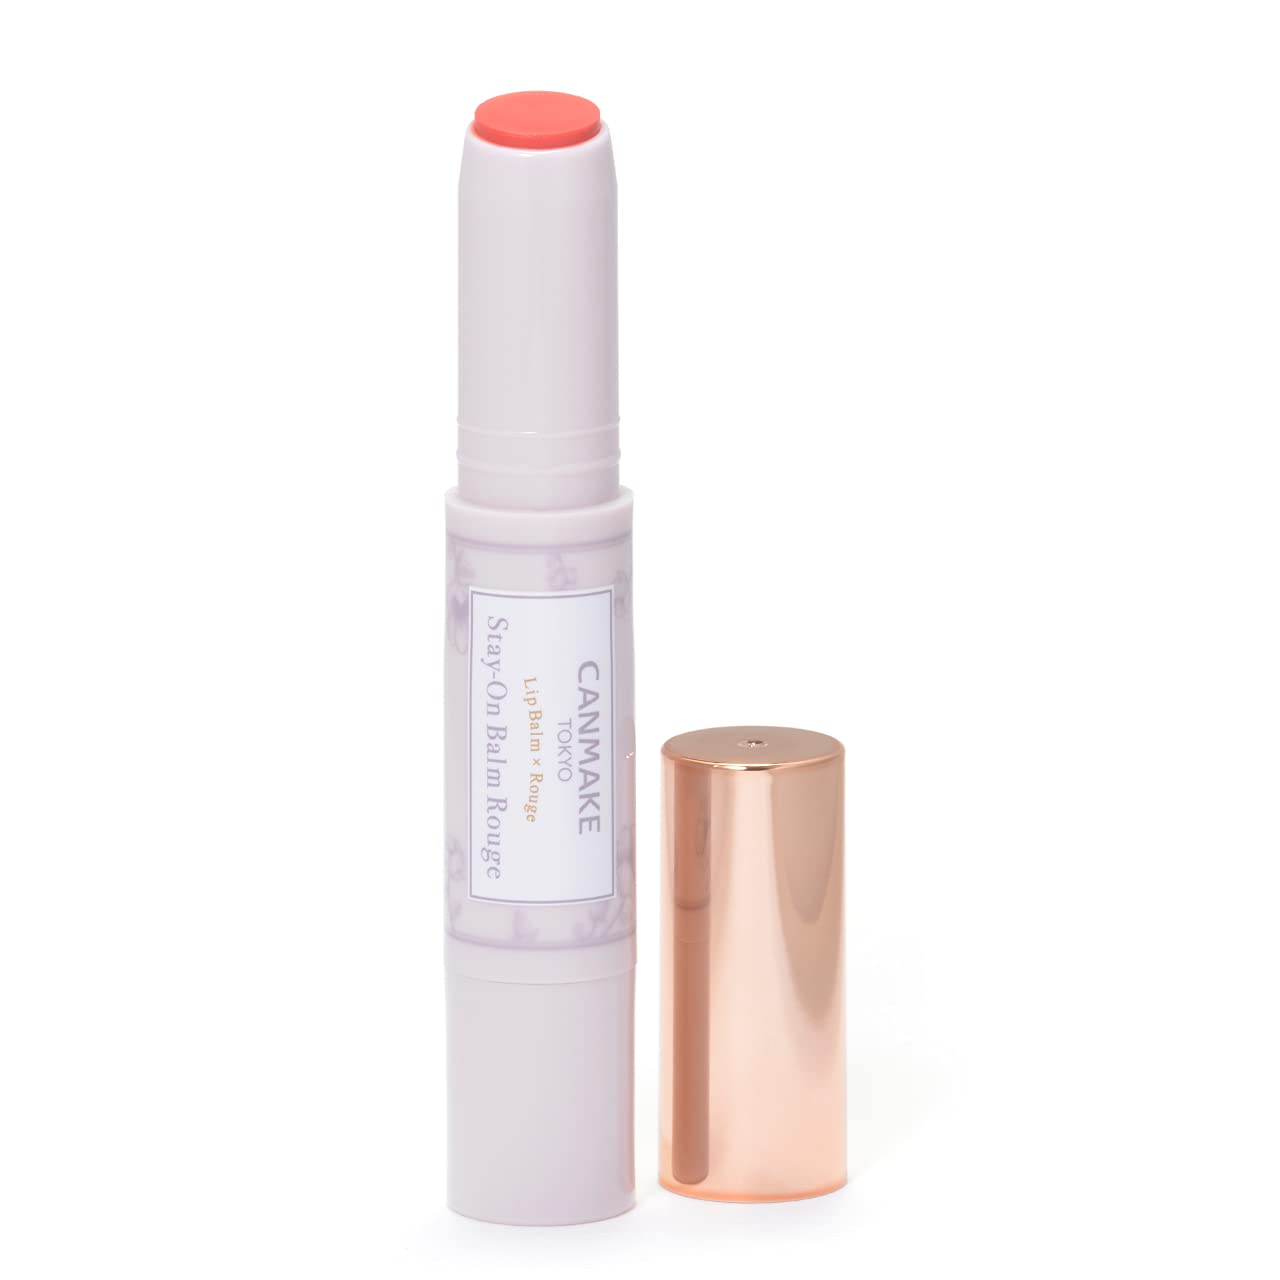 Canmake Stay - On Balm Rouge 02 Smiley Gerbera Long - Lasting Lip Balm 2.7g